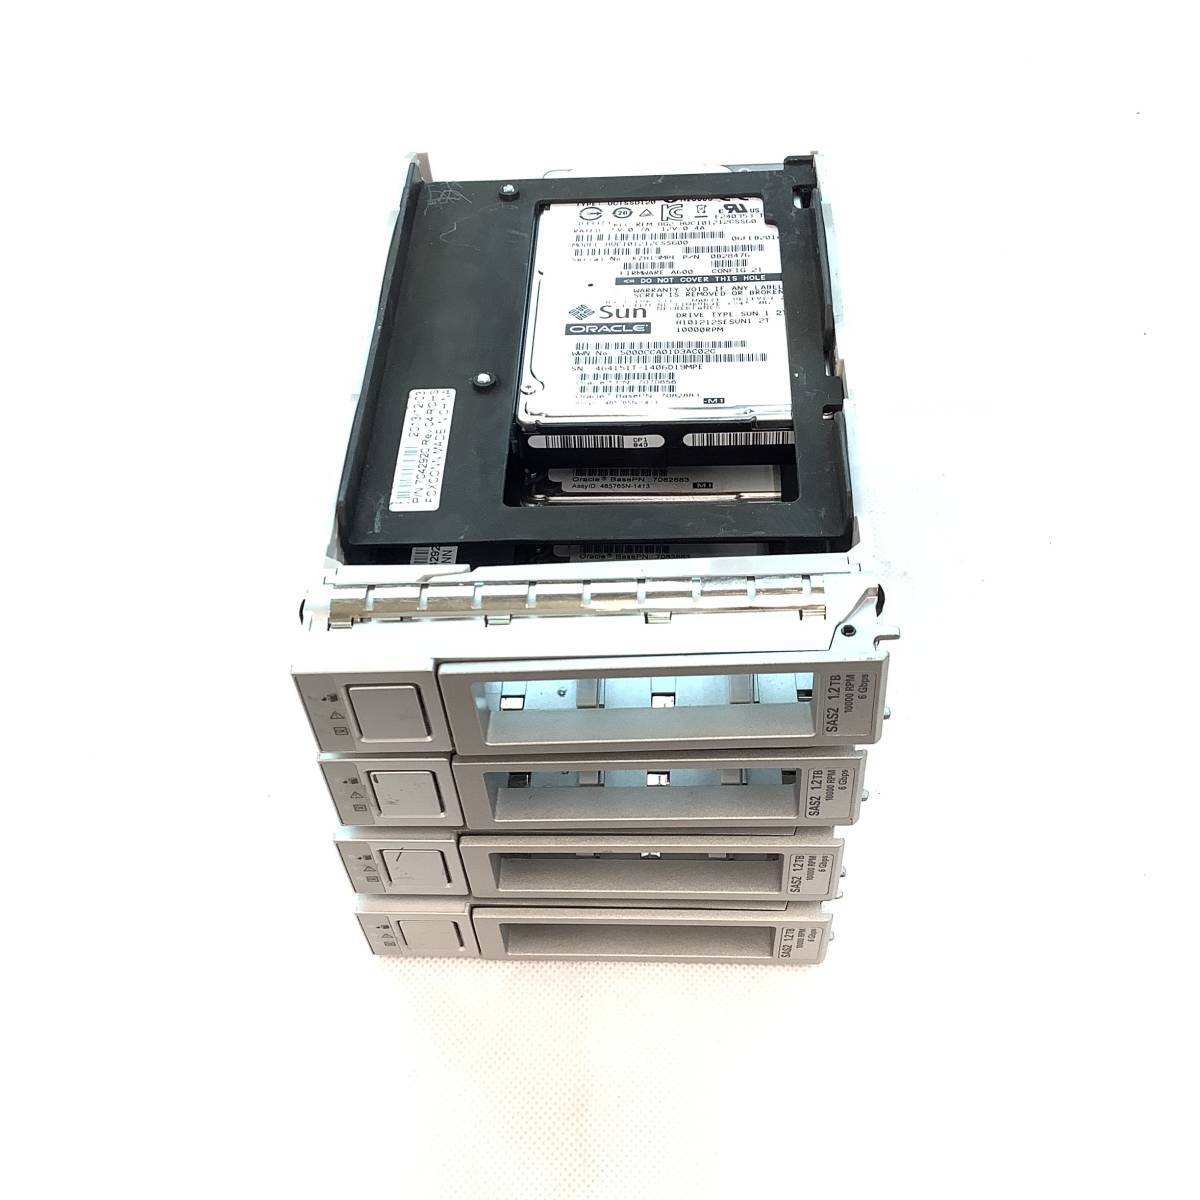 K5091968 Sun ORACLE 1.2TB SAS 10K 2.5 -inch HDD 4 point [ used operation goods ]